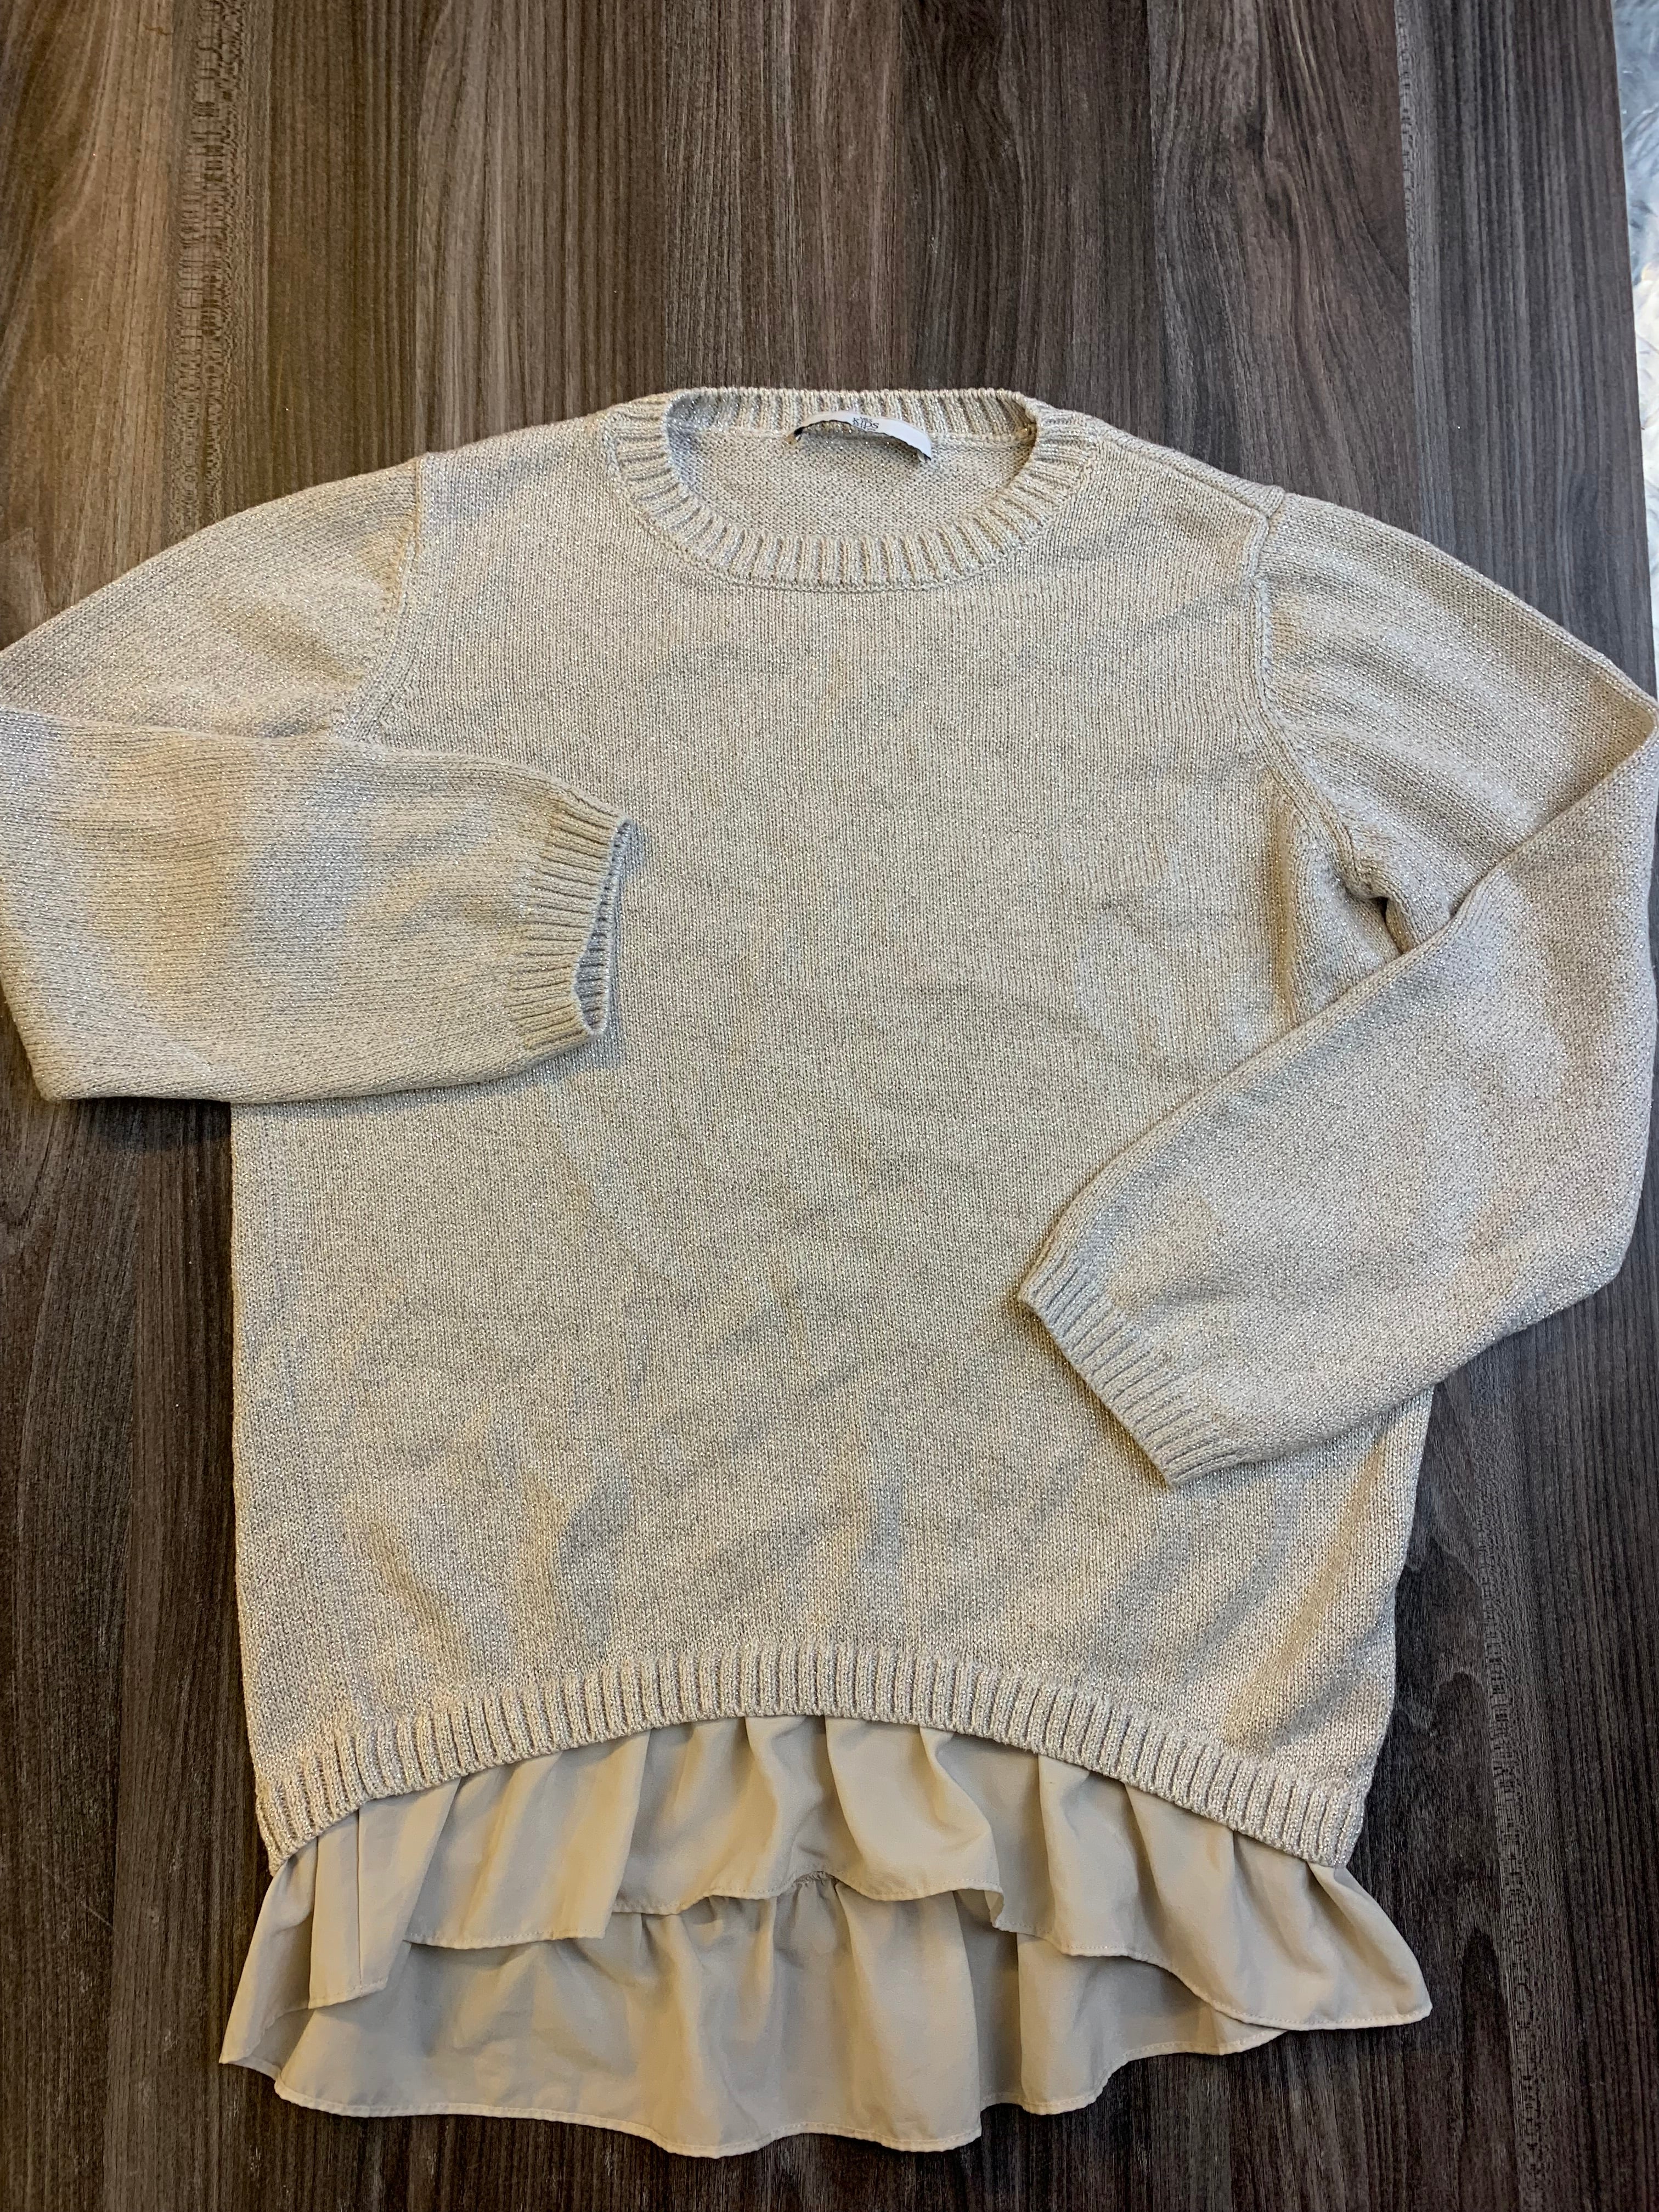 M&S Sparkle Jumper With Ruffles Girls 13-14 Years